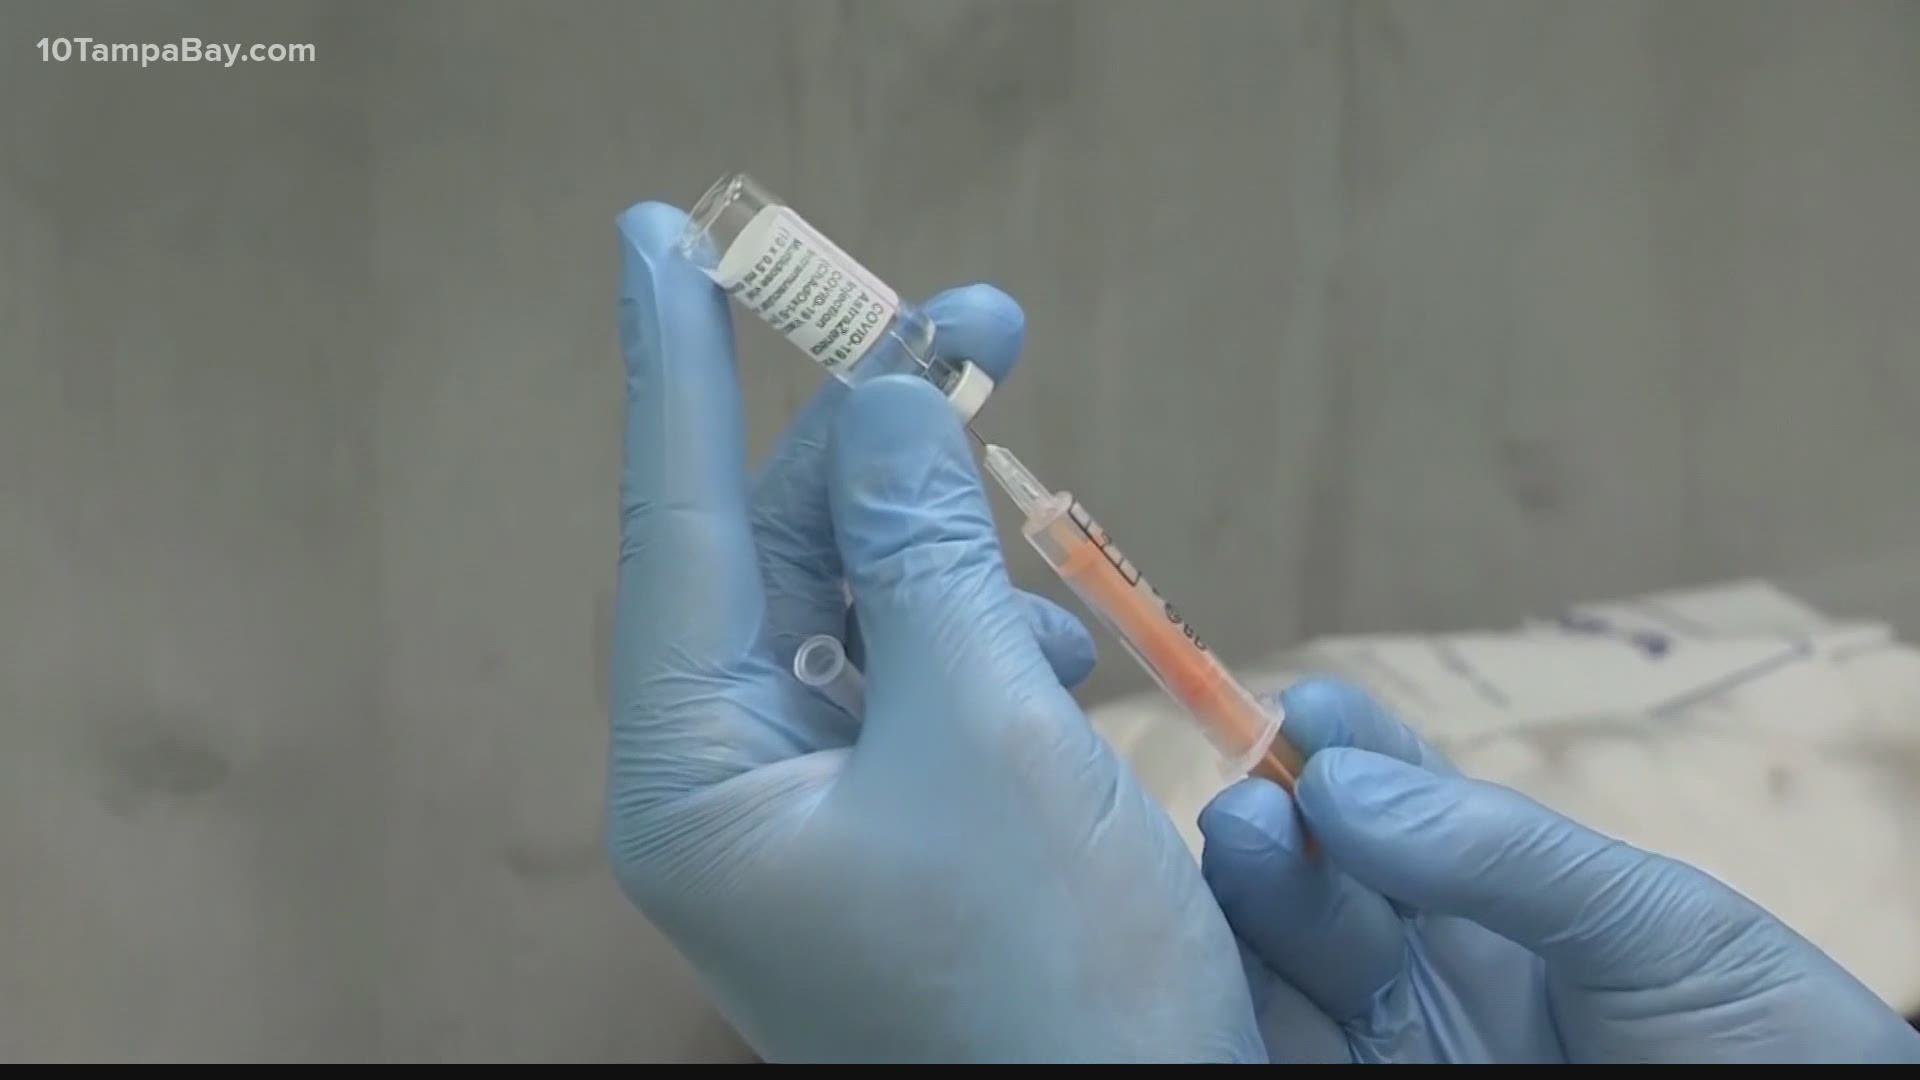 Doctors say lowering the age for vaccine eligibility to 18+ will help target those still spreading the virus.